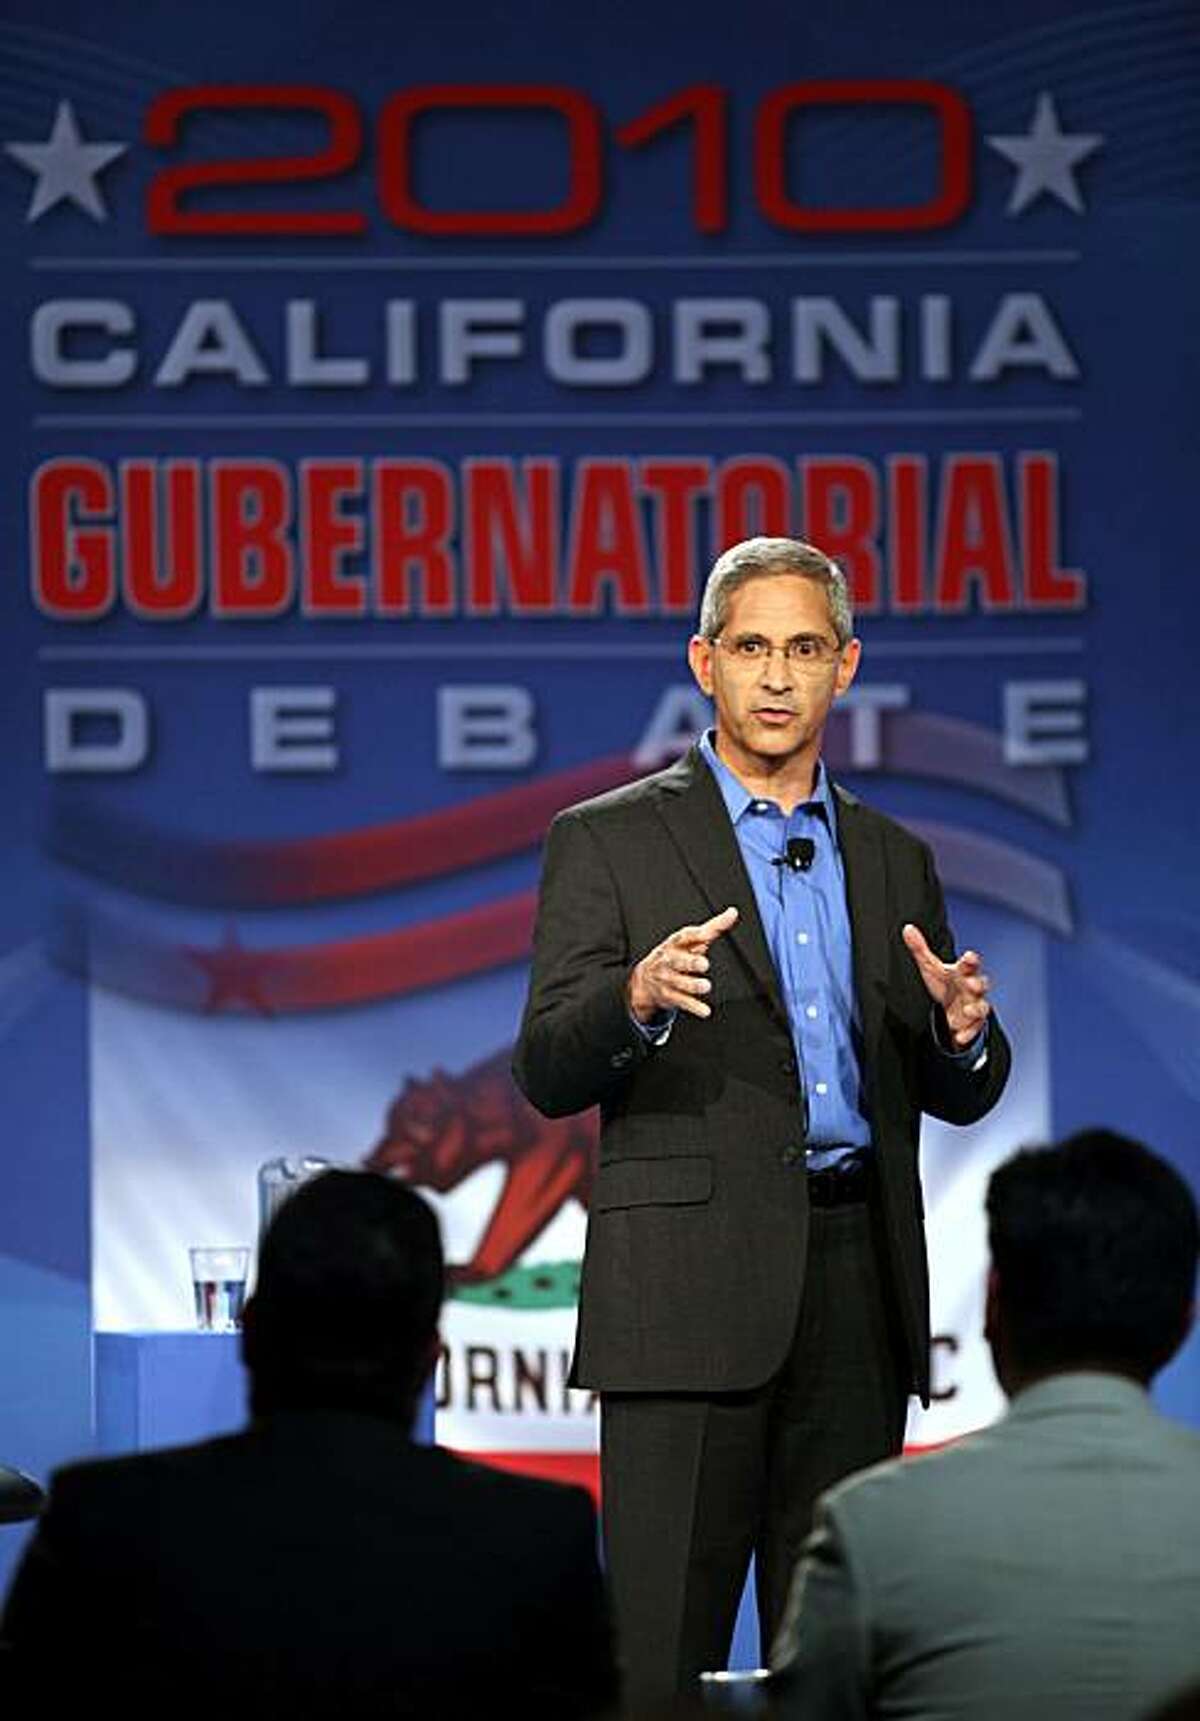 GOP gubernatorial candidates Steve Poizner speaks during a televised debate at the Tech Museum in San Jose, Calif. on Sunday, May 2, 2010. Steve Poizner and Meg Whitman squared off in their second debate as each vies to become the GOP nominee for California's governor.